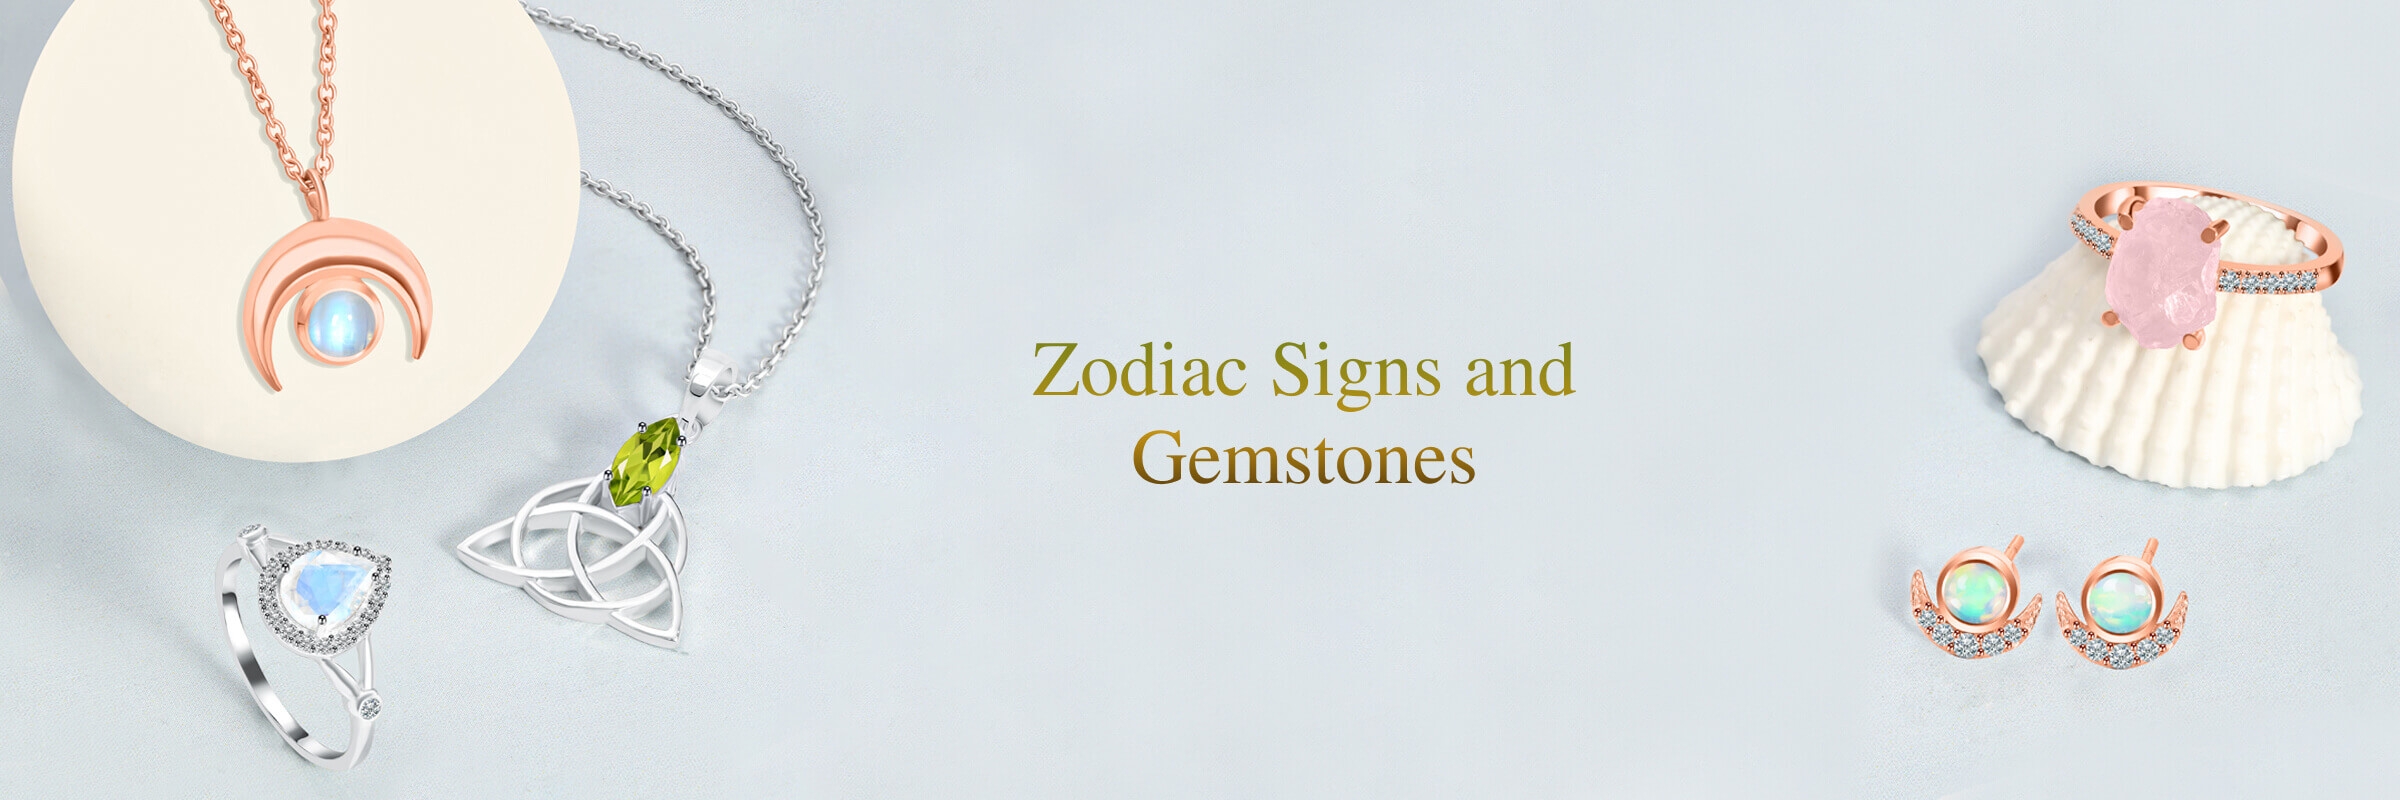 zodiac signs and gemstones